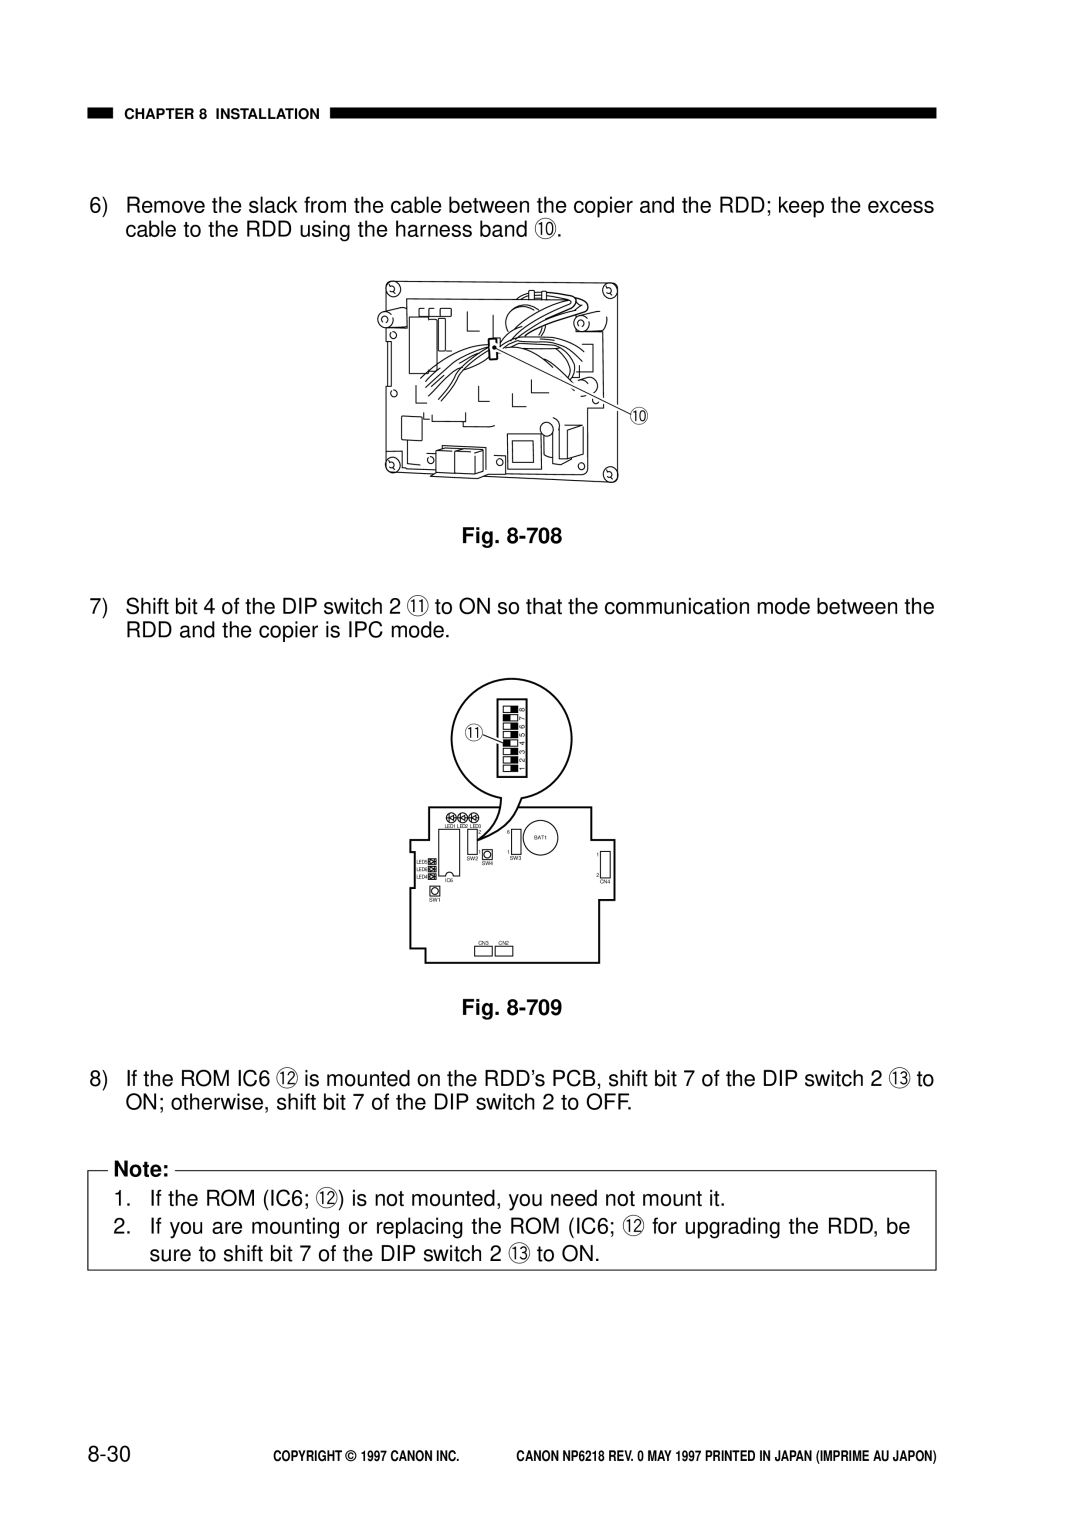 Canon NP6218, FY8-13EX-000 service manual 8-30, If the ROM IC6 !2 is not mounted, you need not mount it 